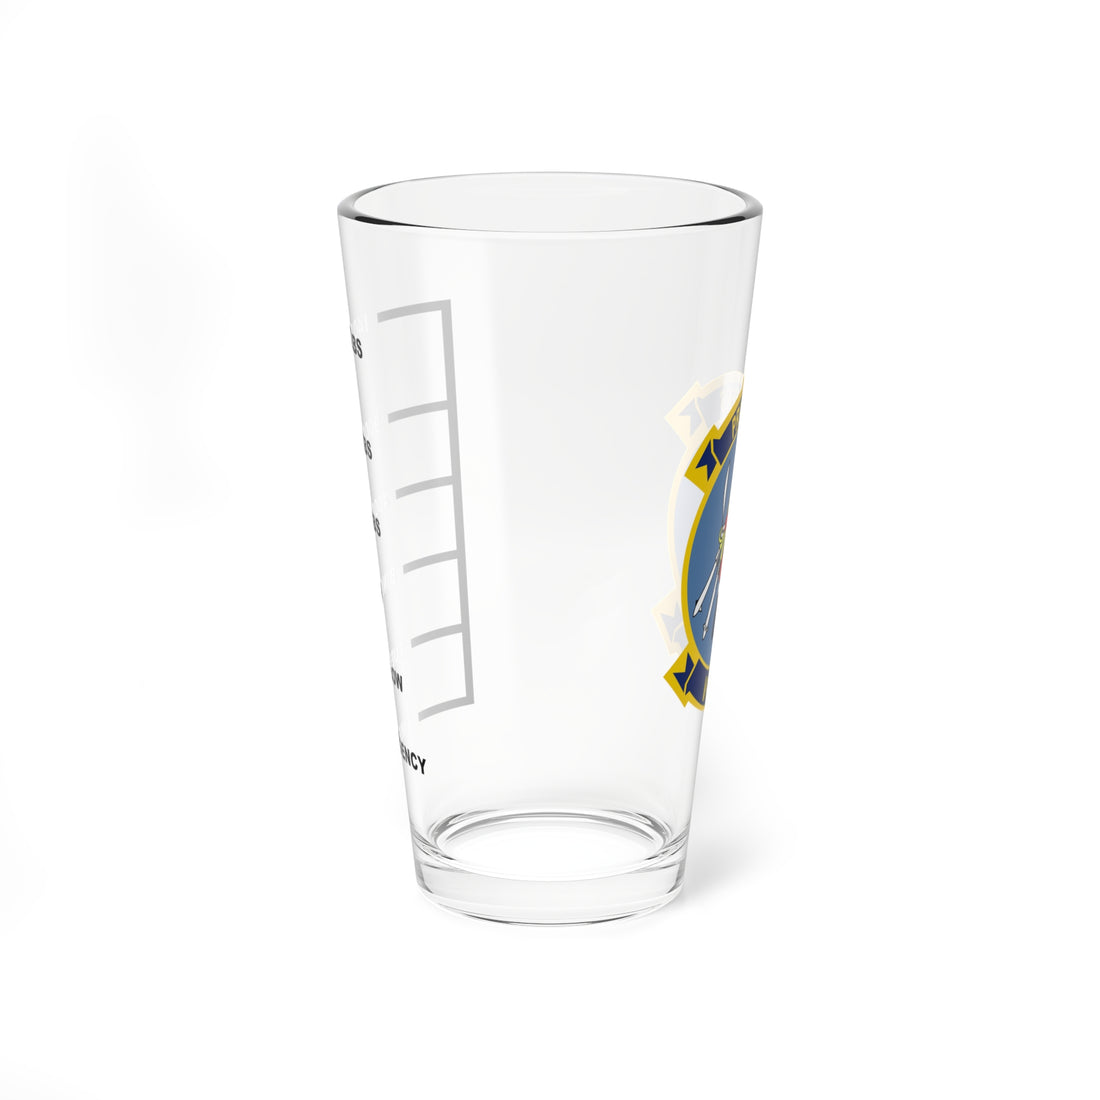 VFA-132 "Privateers" Fuel Low Pint Glass, Navy Strike Fighter Squadron flying the F/A-18 Hornet